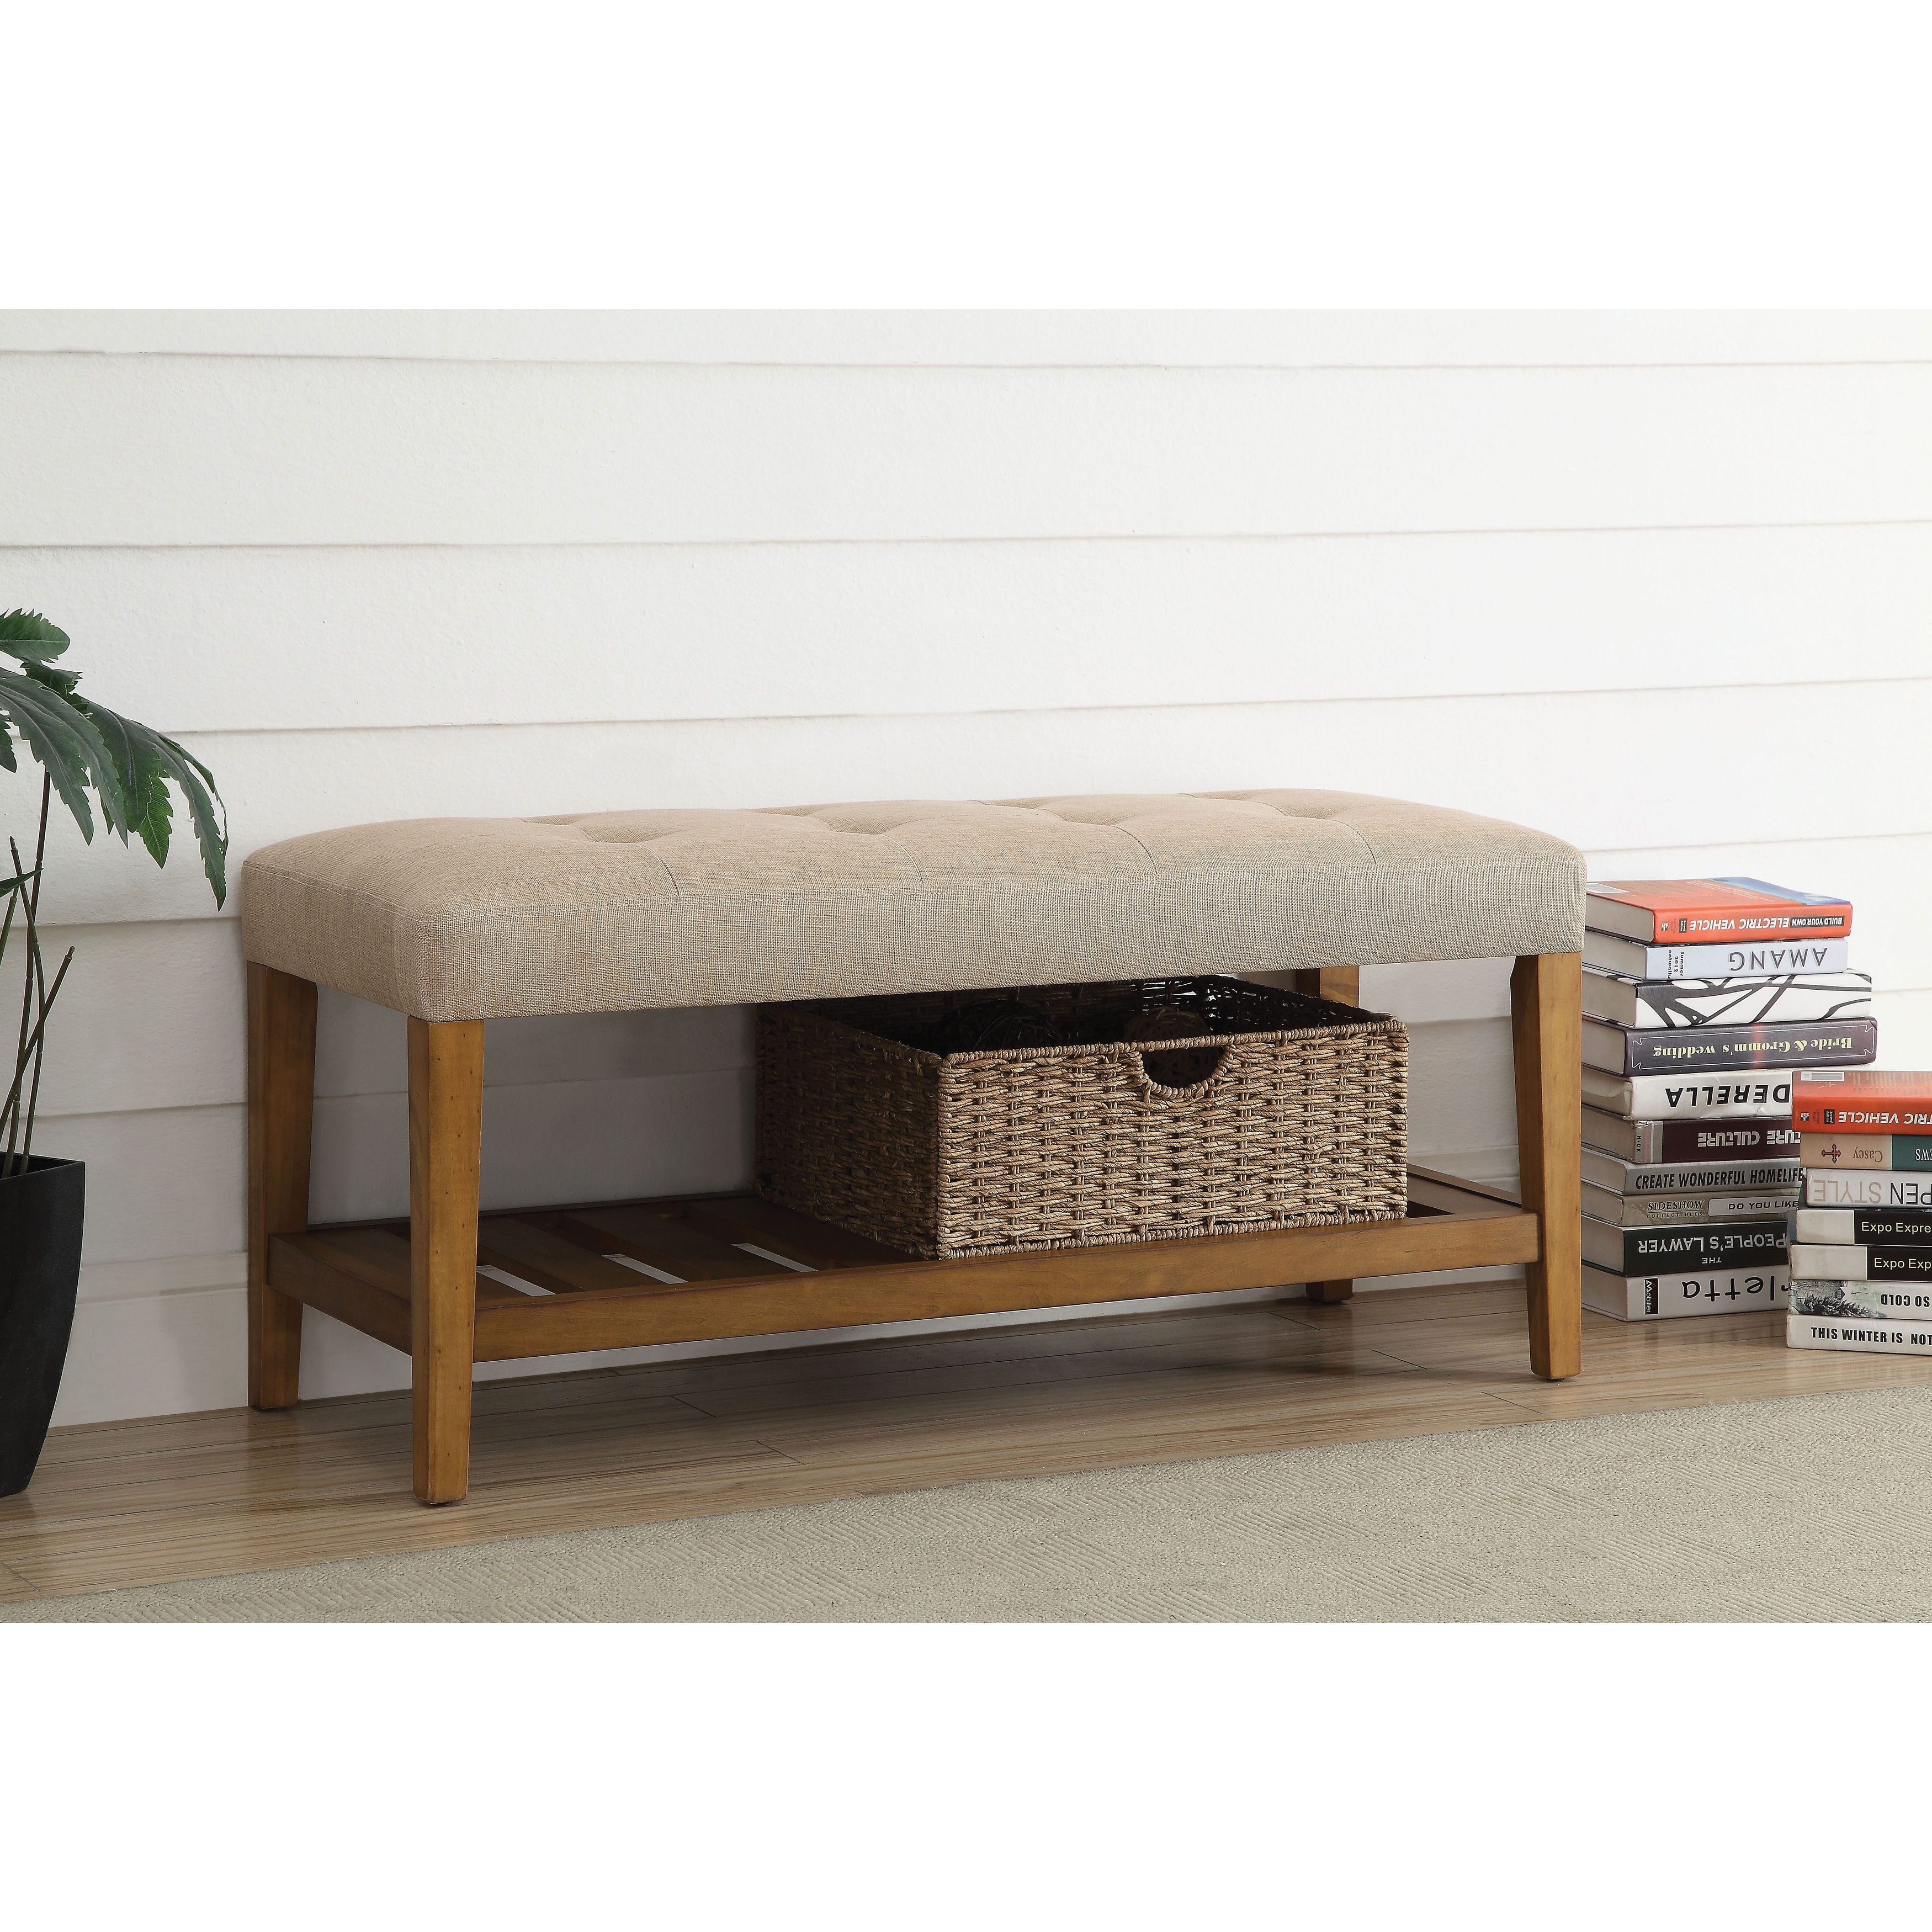 https://ak1.ostkcdn.com/images/products/is/images/direct/d363d9e4140e9a698177e653b346df2fe70568b6/Charla-Bench-in-Beige-Oak.jpg